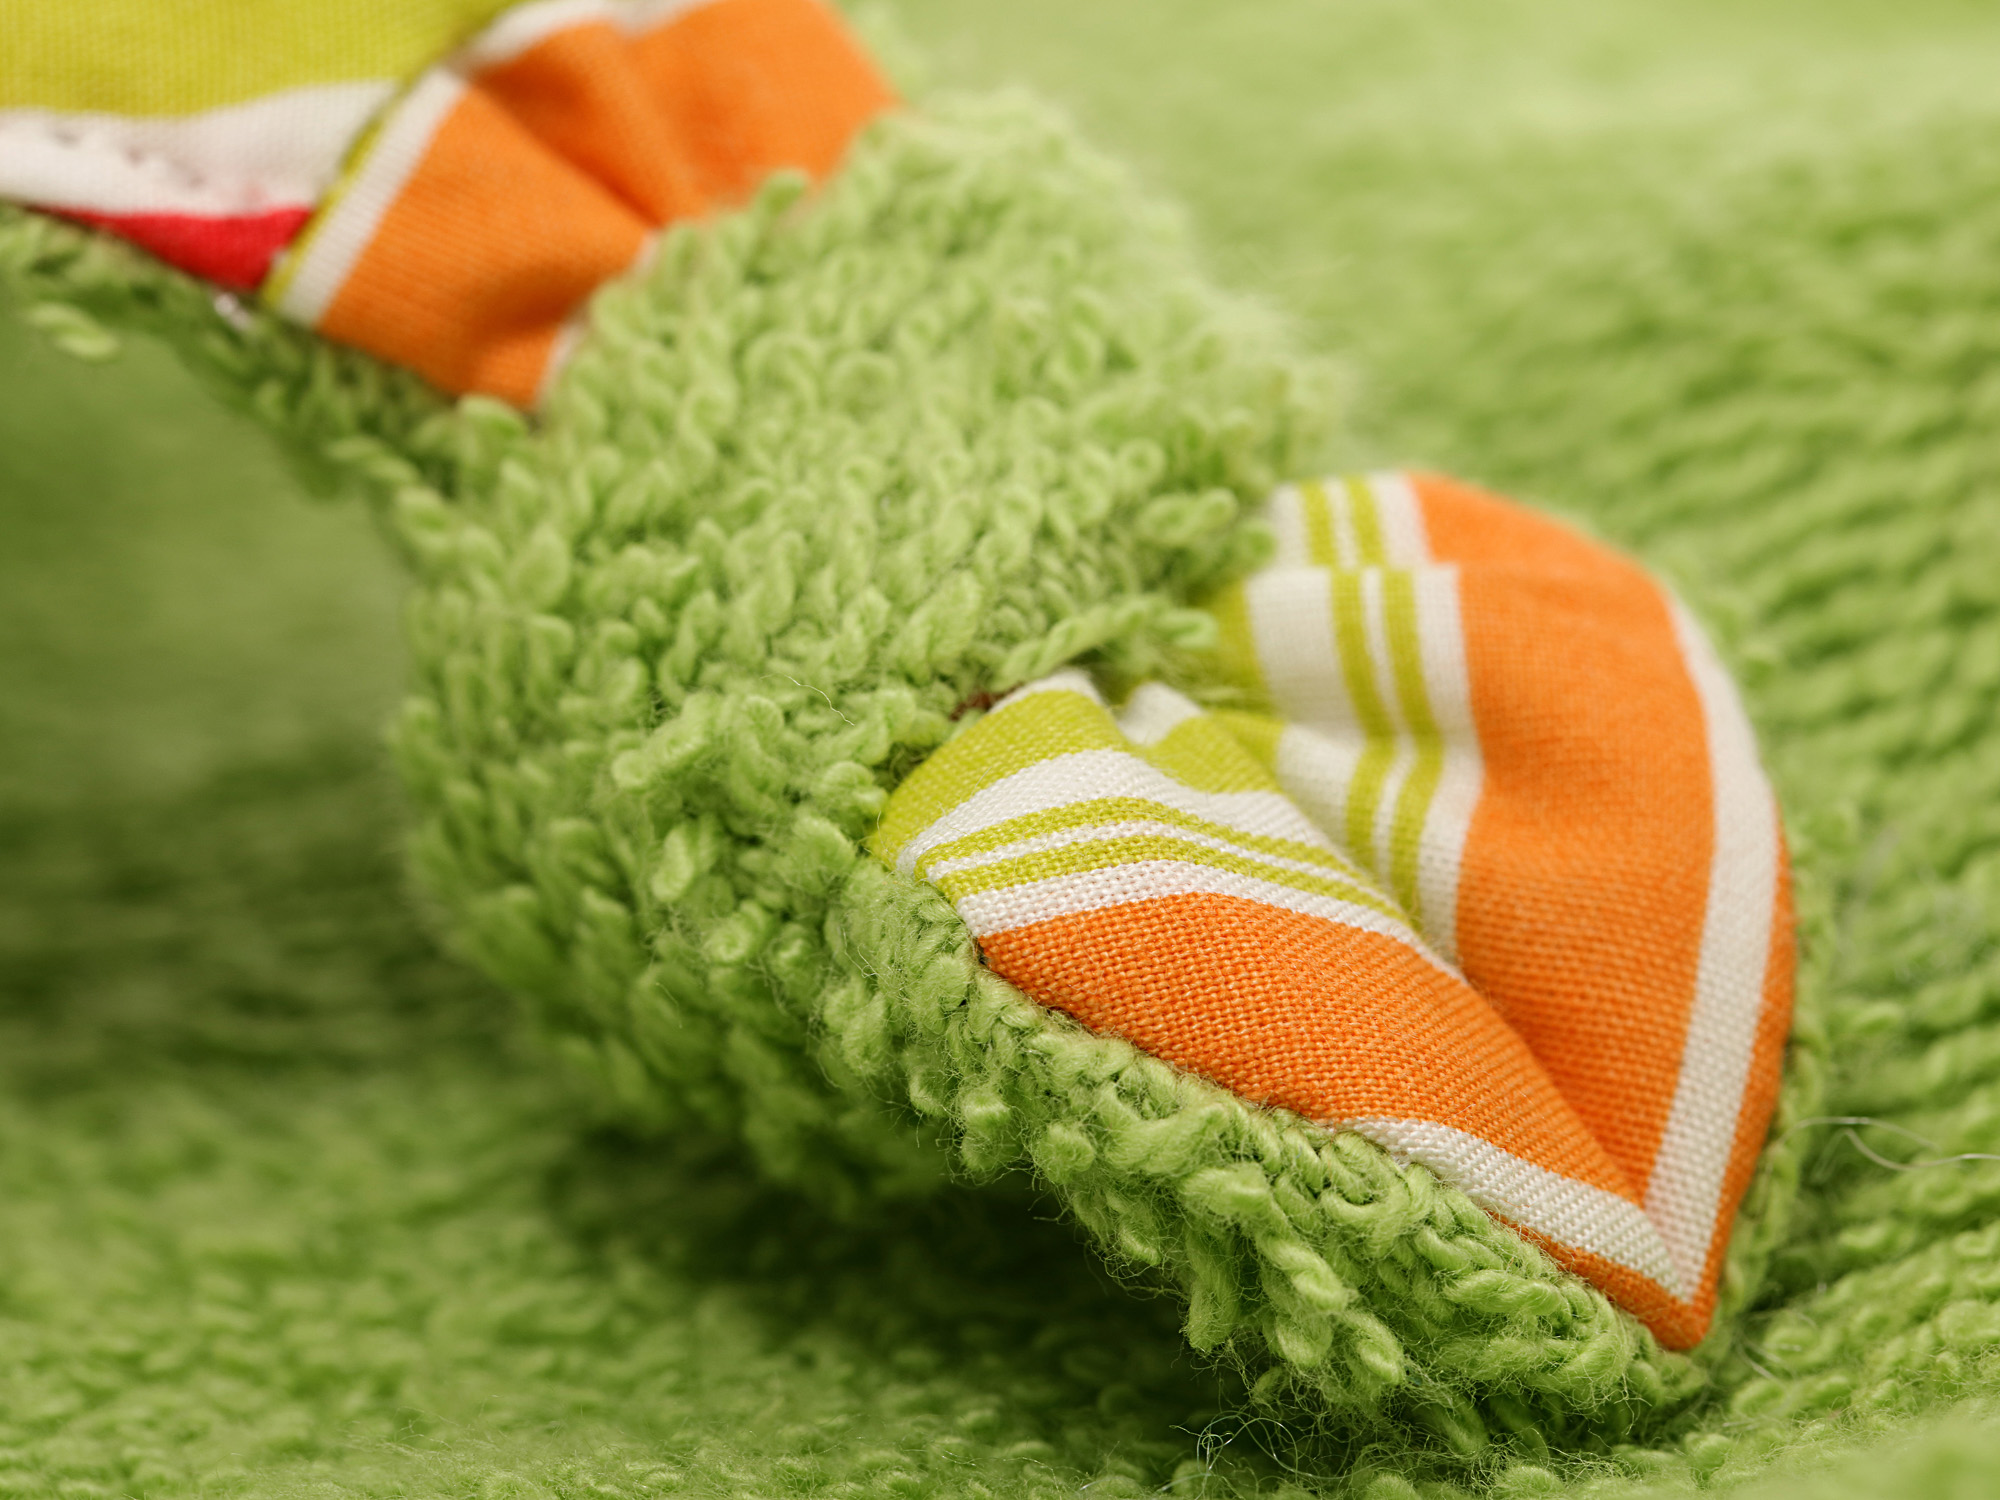 Colourful baby blankie "Fortis Frog"